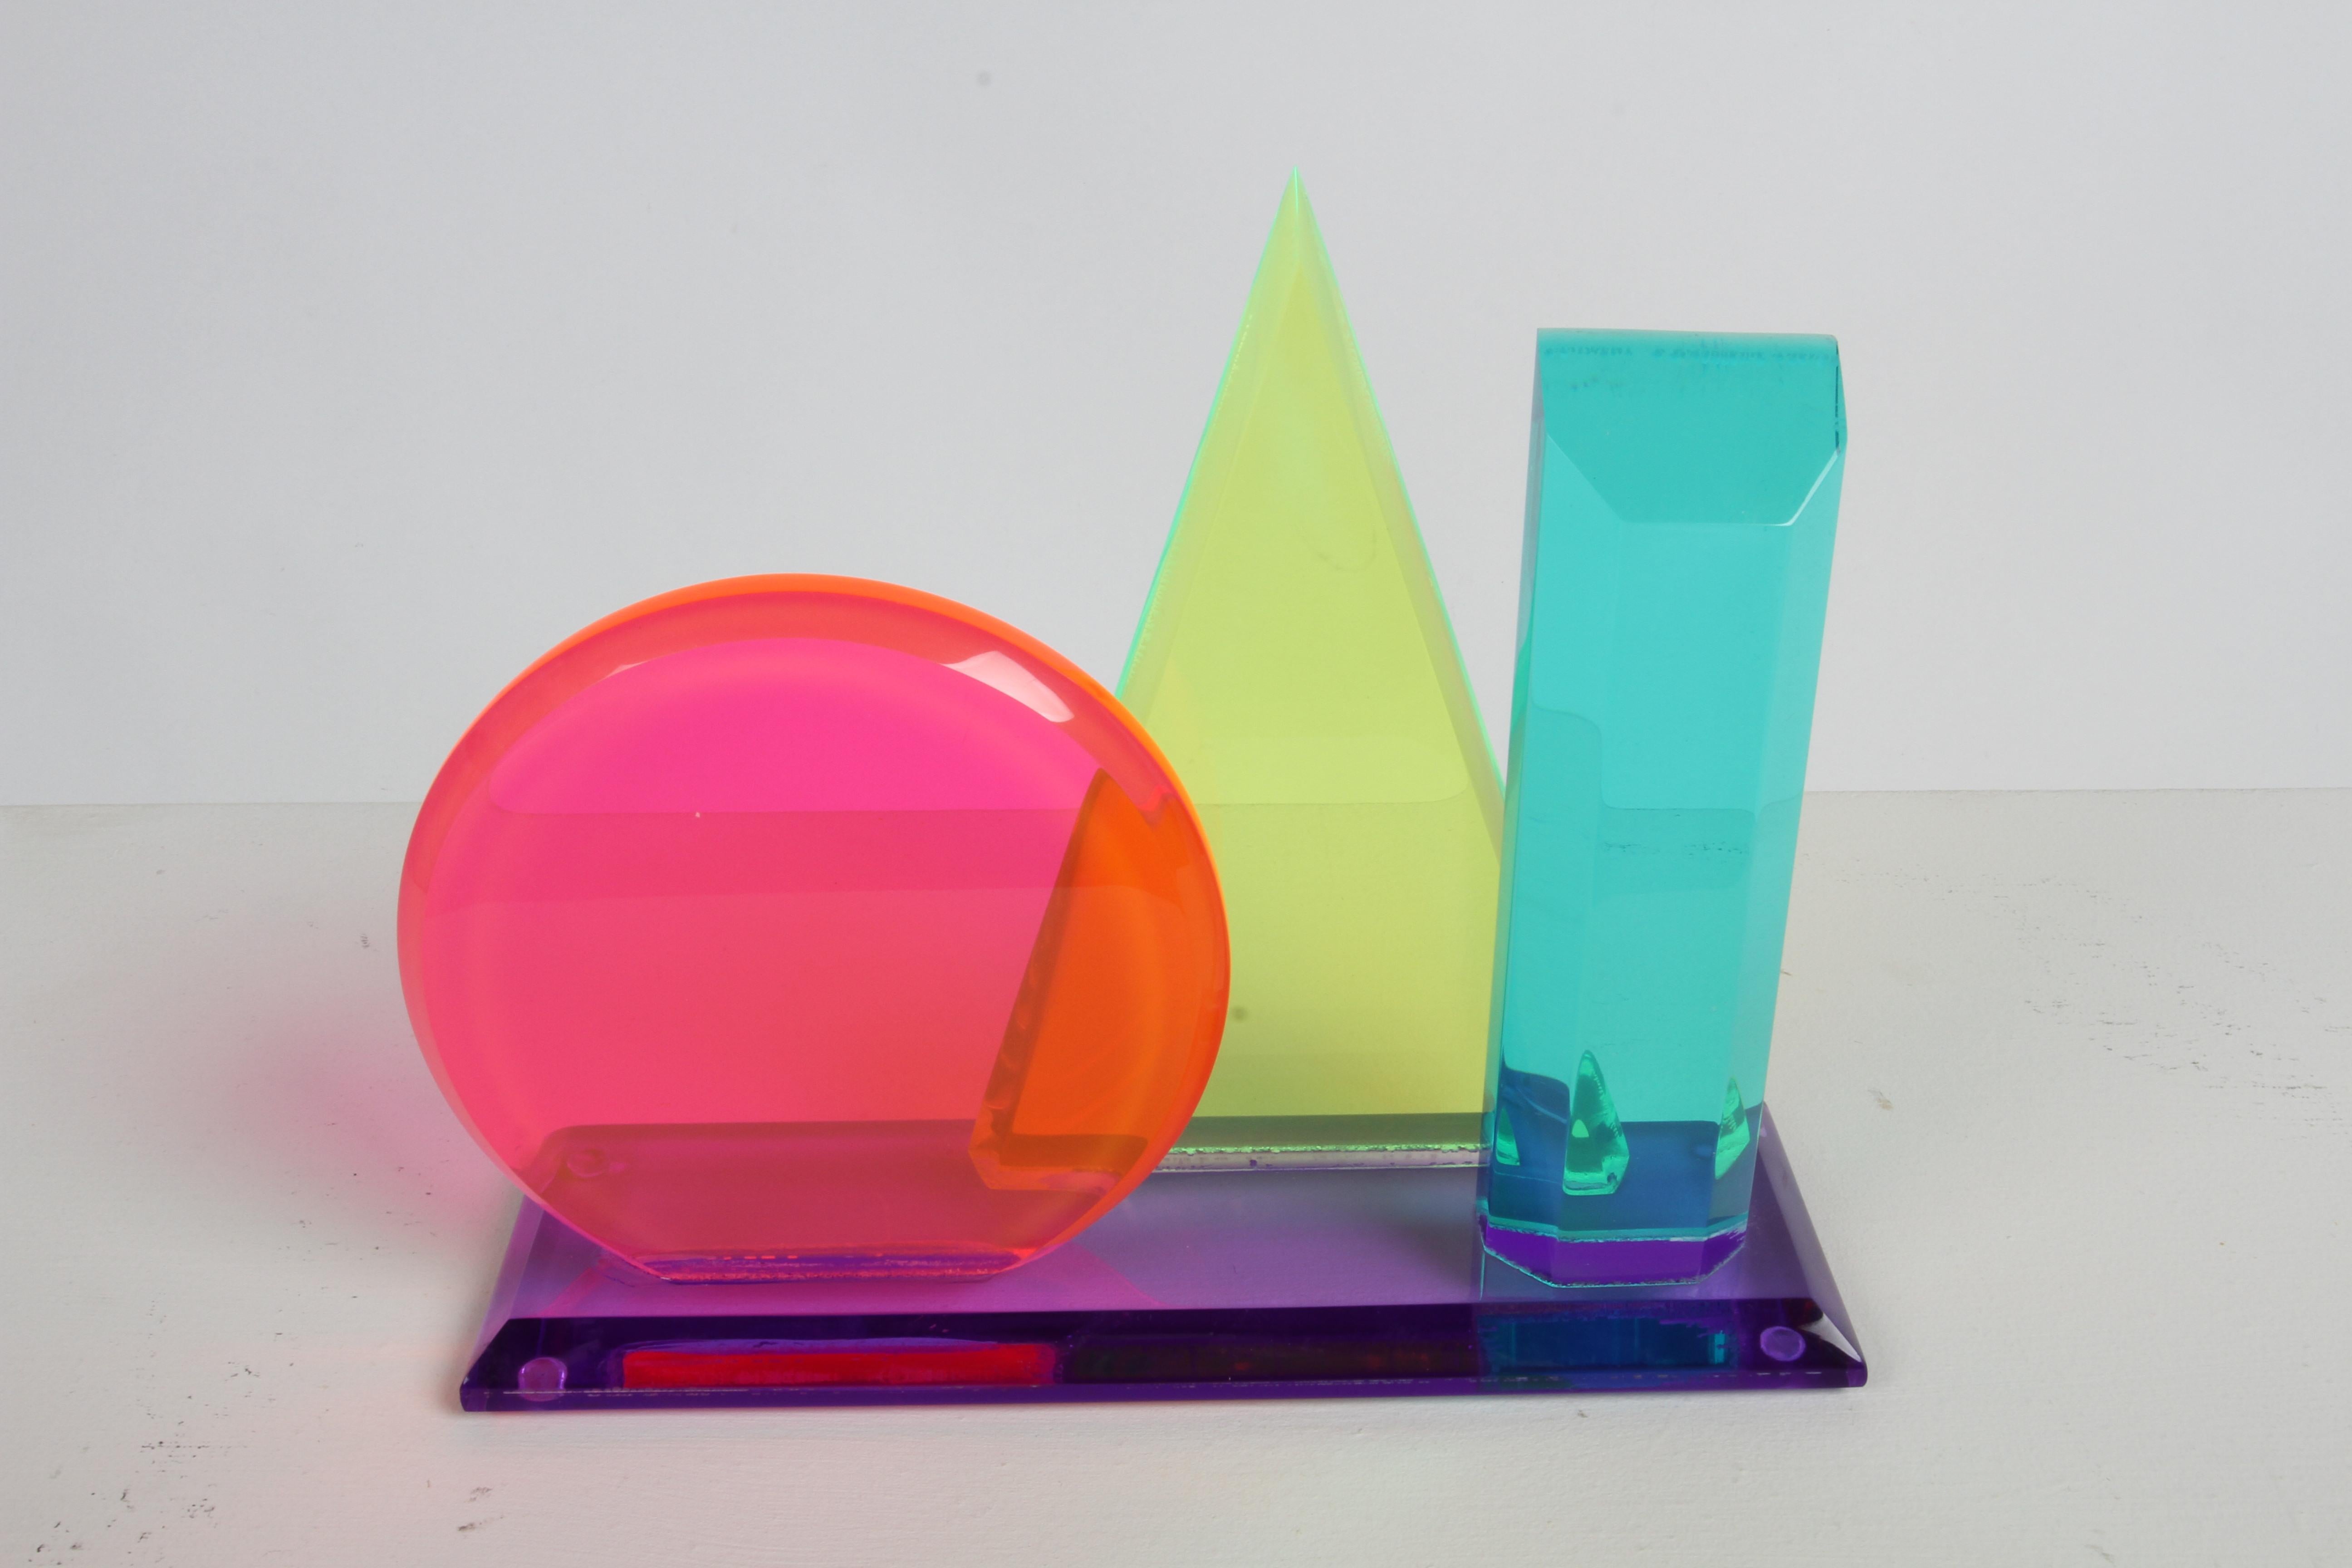 In the style of Vasa Mihich or Shlomi Haziza, 1980s sculpture colored beveled shapes made of acrylic or lucite with pink circle, yellow triangle, teal rectangle on a purple base. This makes a great desk accessory or a sculptural object for a